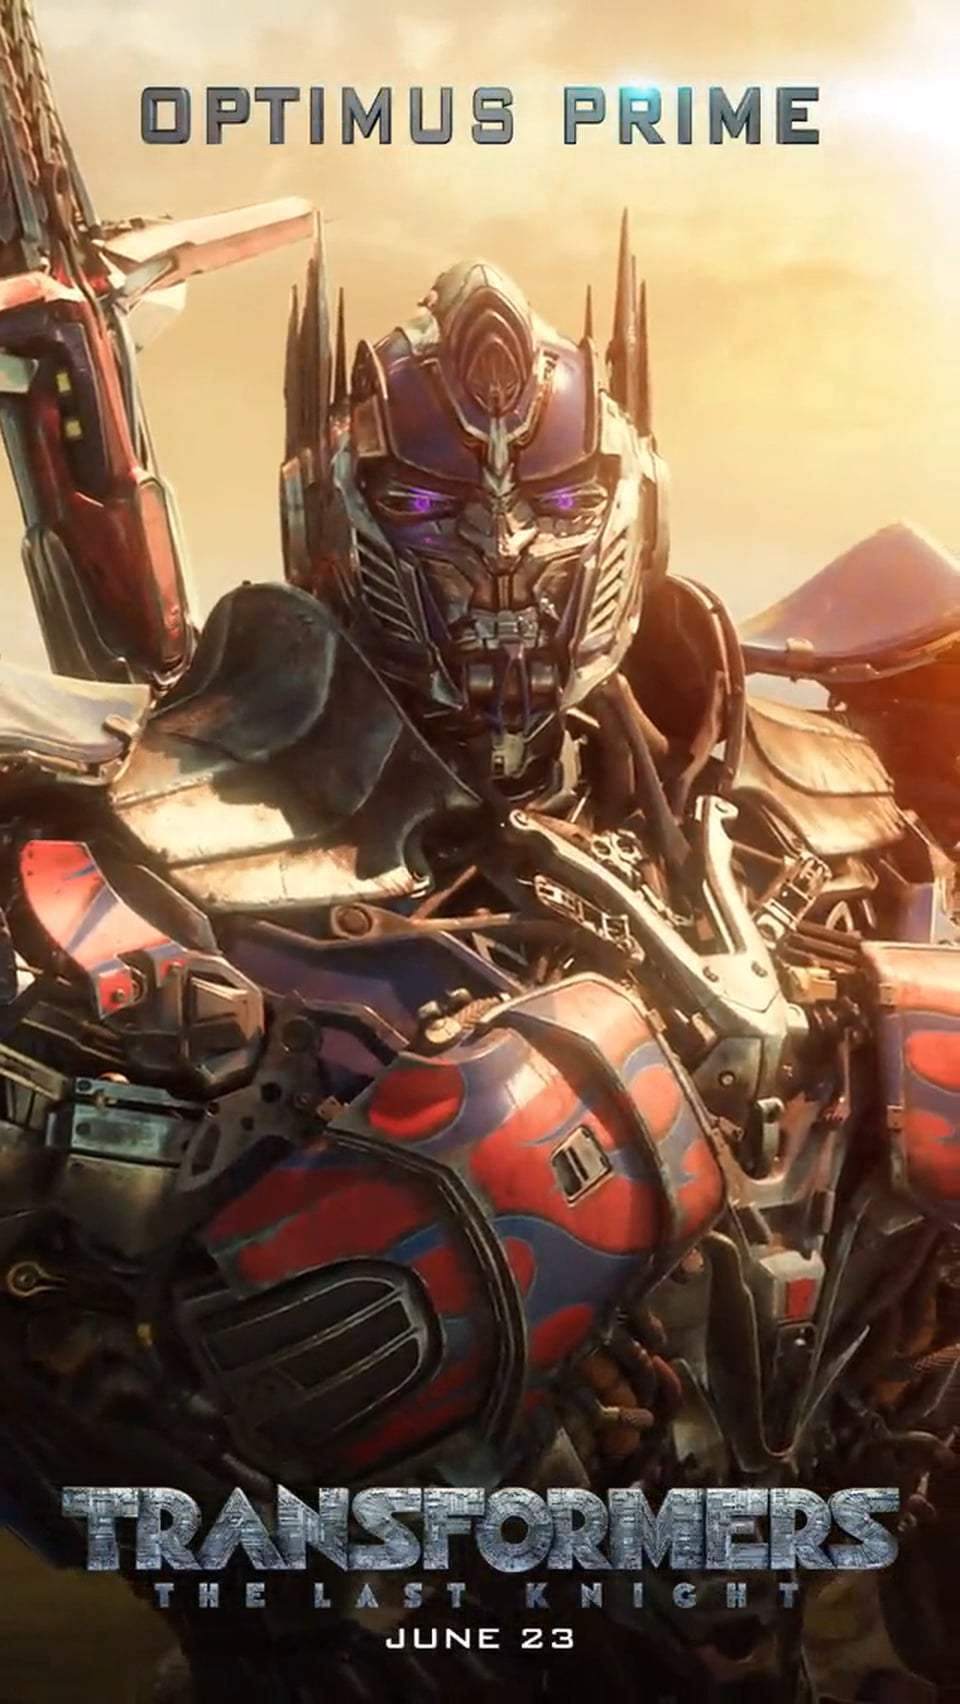 Transformers: The Last Knight Motion Poster - Optimus Prime (2017)